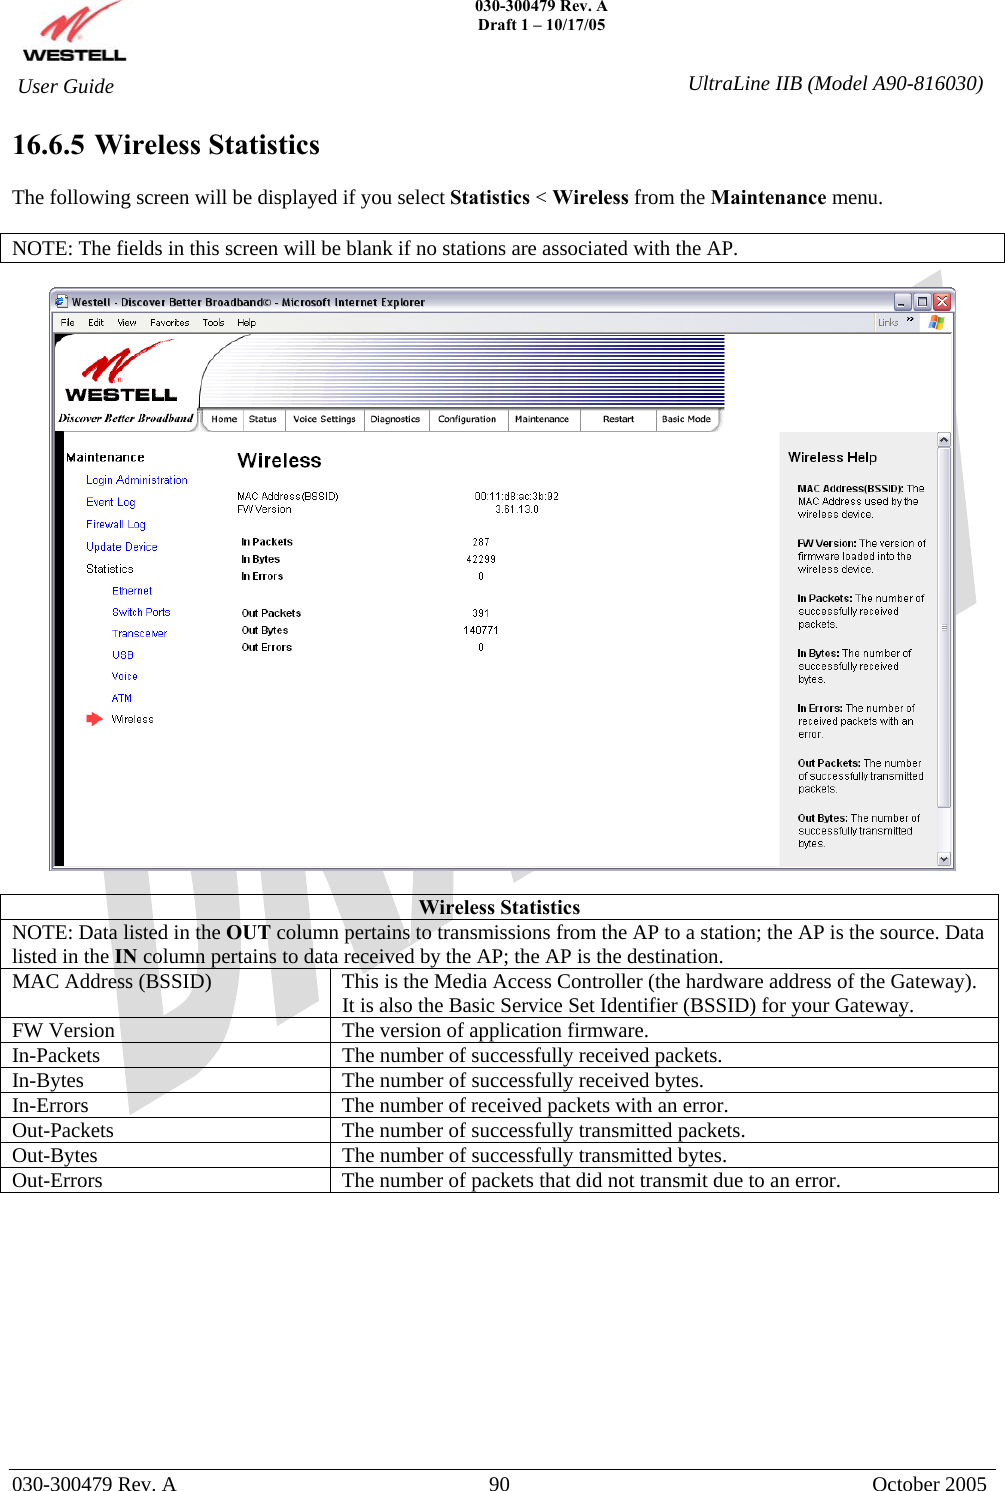    030-300479 Rev. A Draft 1 – 10/17/05   030-300479 Rev. A  90  October 2005  User Guide  UltraLine IIB (Model A90-816030)16.6.5  Wireless Statistics  The following screen will be displayed if you select Statistics &lt; Wireless from the Maintenance menu.  NOTE: The fields in this screen will be blank if no stations are associated with the AP.    Wireless Statistics NOTE: Data listed in the OUT column pertains to transmissions from the AP to a station; the AP is the source. Data listed in the IN column pertains to data received by the AP; the AP is the destination. MAC Address (BSSID)  This is the Media Access Controller (the hardware address of the Gateway). It is also the Basic Service Set Identifier (BSSID) for your Gateway. FW Version  The version of application firmware. In-Packets  The number of successfully received packets. In-Bytes  The number of successfully received bytes. In-Errors  The number of received packets with an error. Out-Packets  The number of successfully transmitted packets. Out-Bytes  The number of successfully transmitted bytes. Out-Errors  The number of packets that did not transmit due to an error.        